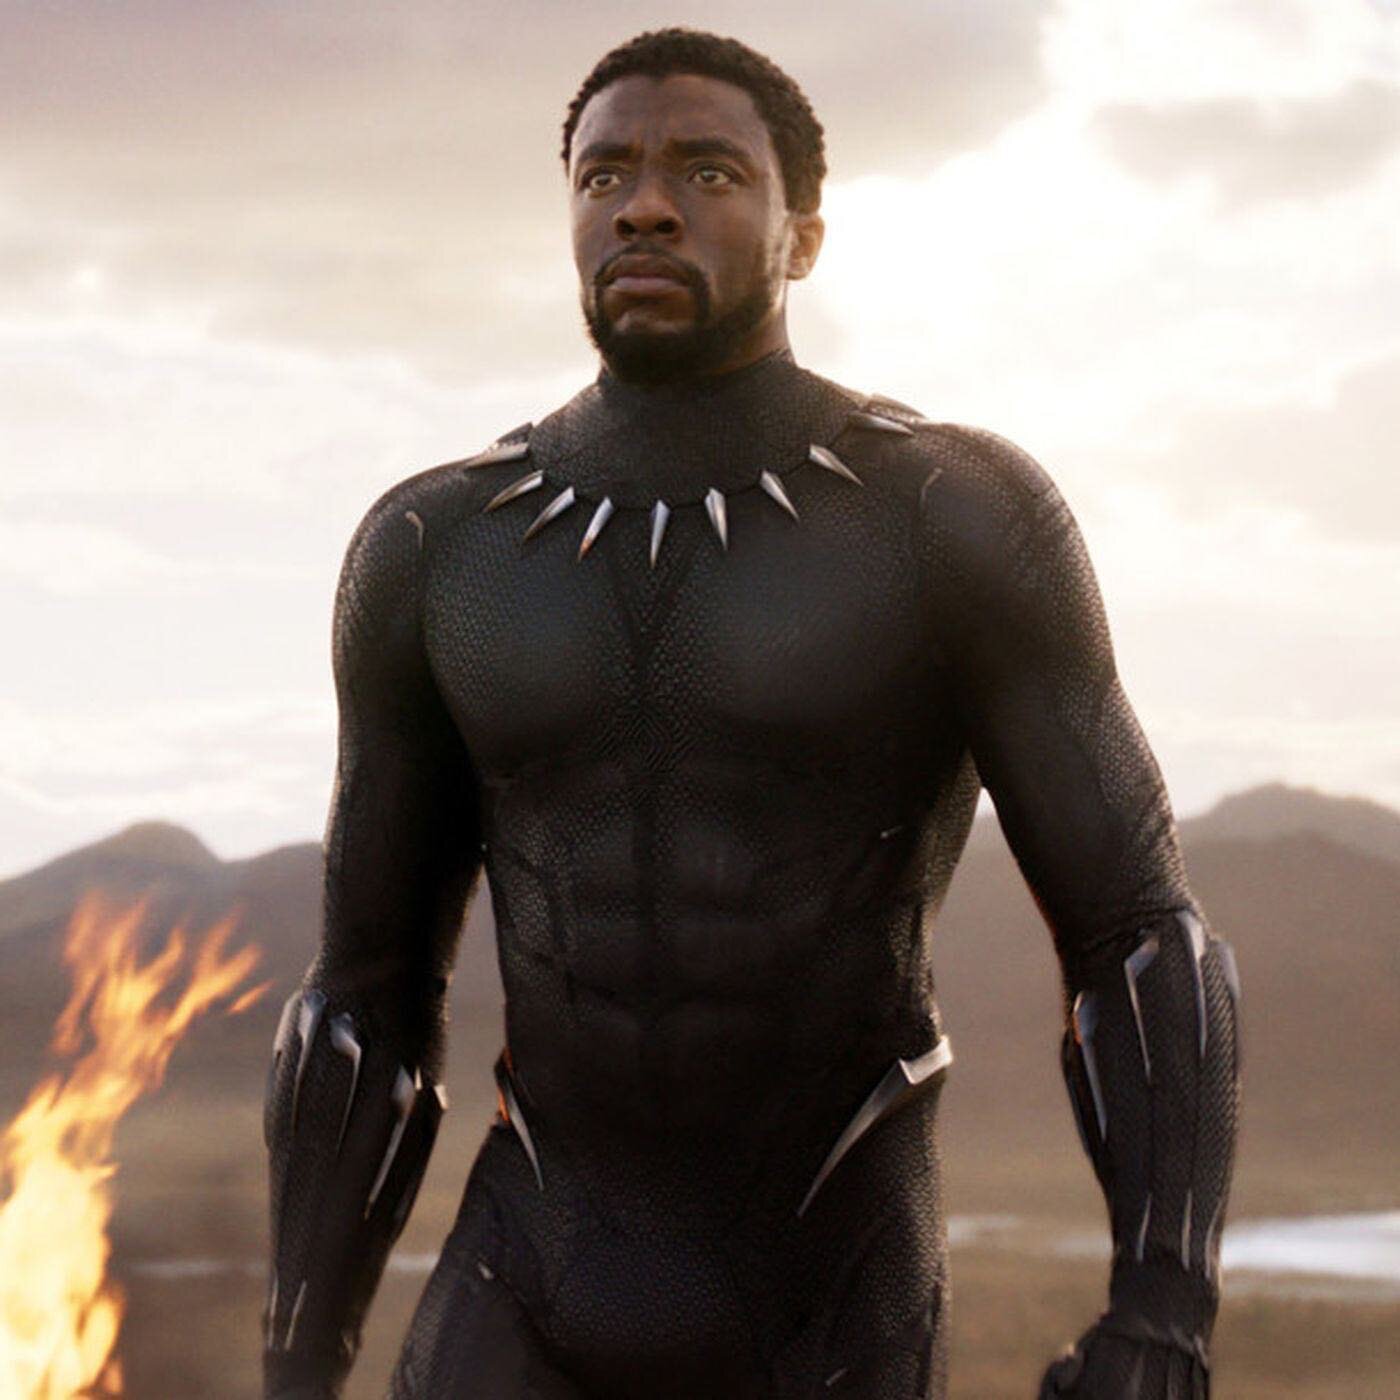 #RIP King! You inspired us all with your immeasurable talent and brought immense pride to me and many Africans with your portrayal of the Black Panther. Sending thoughts and love to the Boseman family. 😔 #chadwickboseman #blackpanther